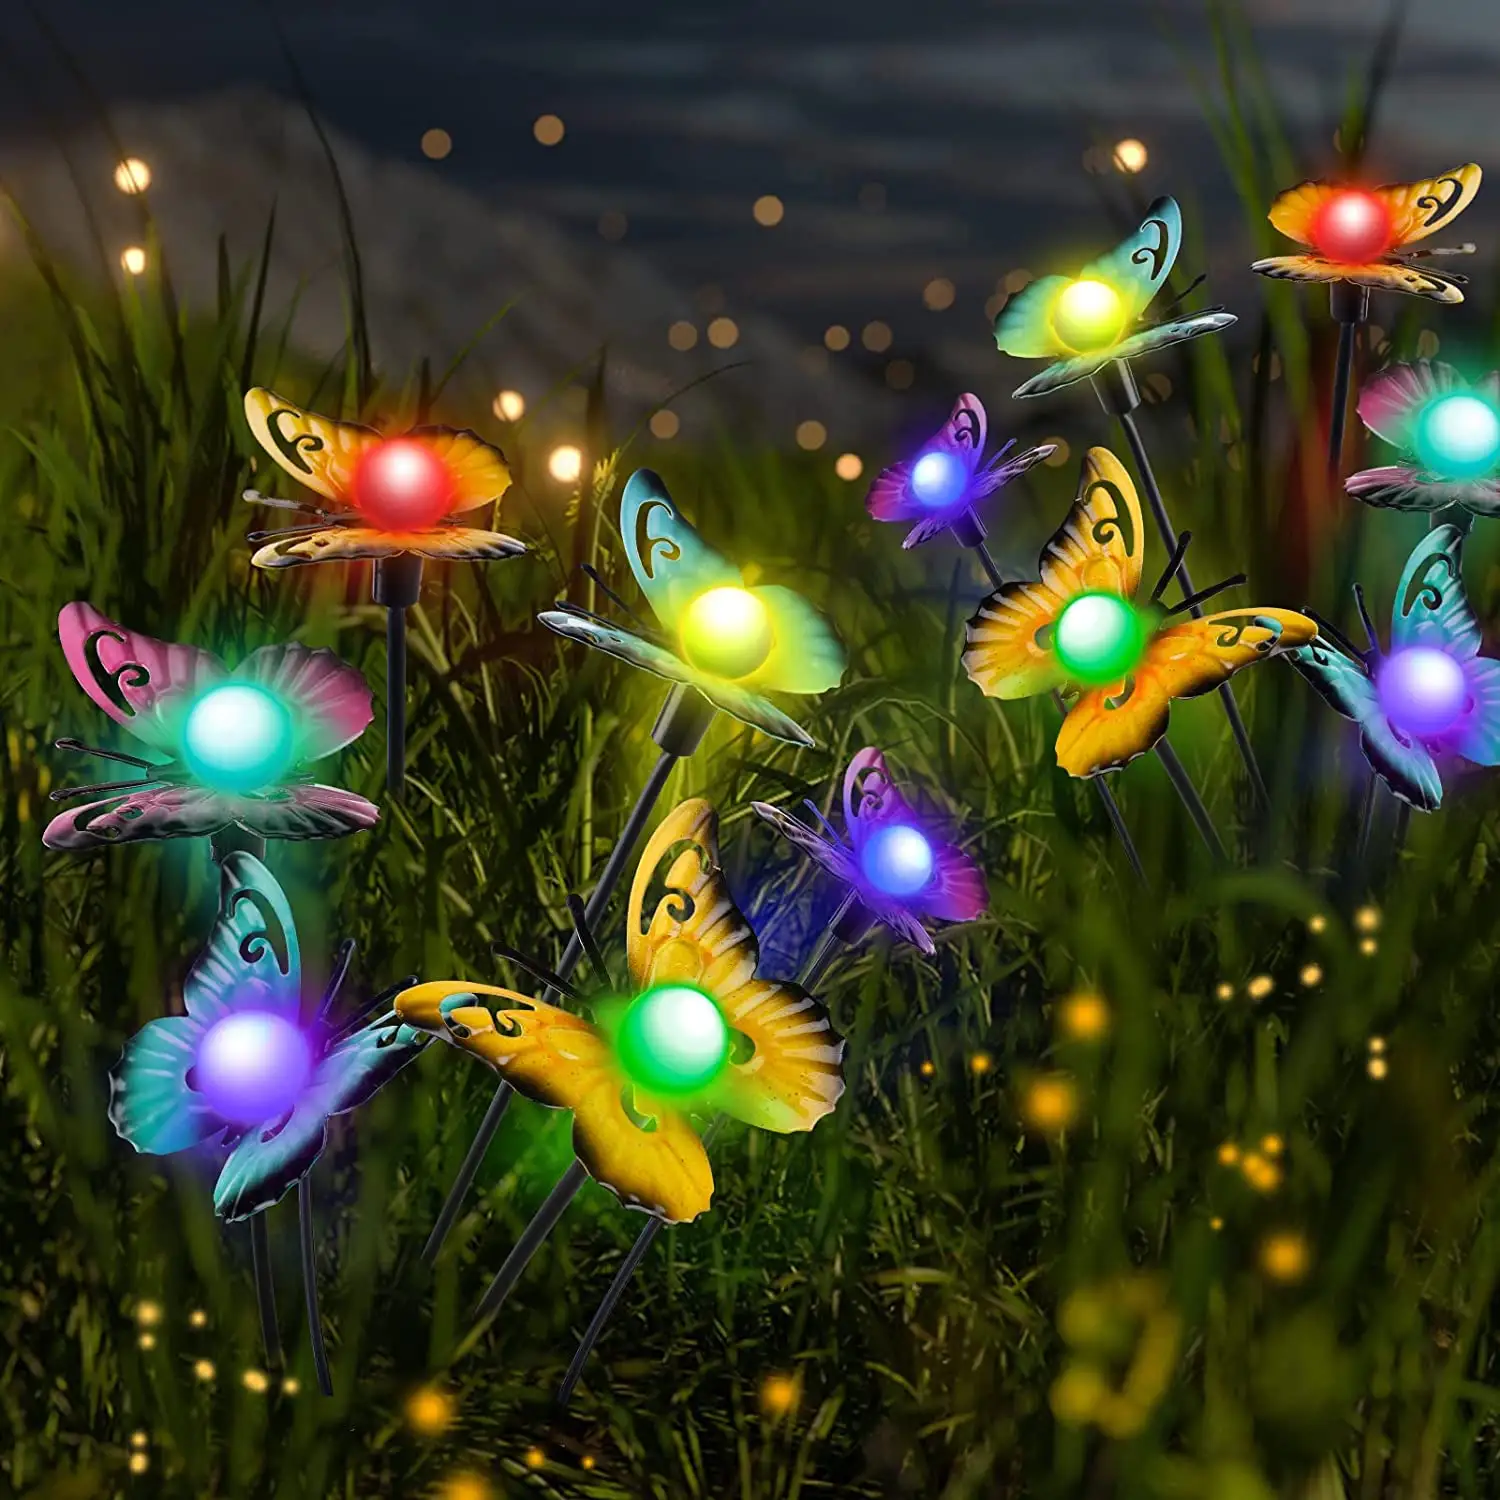 Amazon Hot Selling 6 Led Solar Butterfly Garden Stake Suppliers Solar Firefly Lights With Butterfly